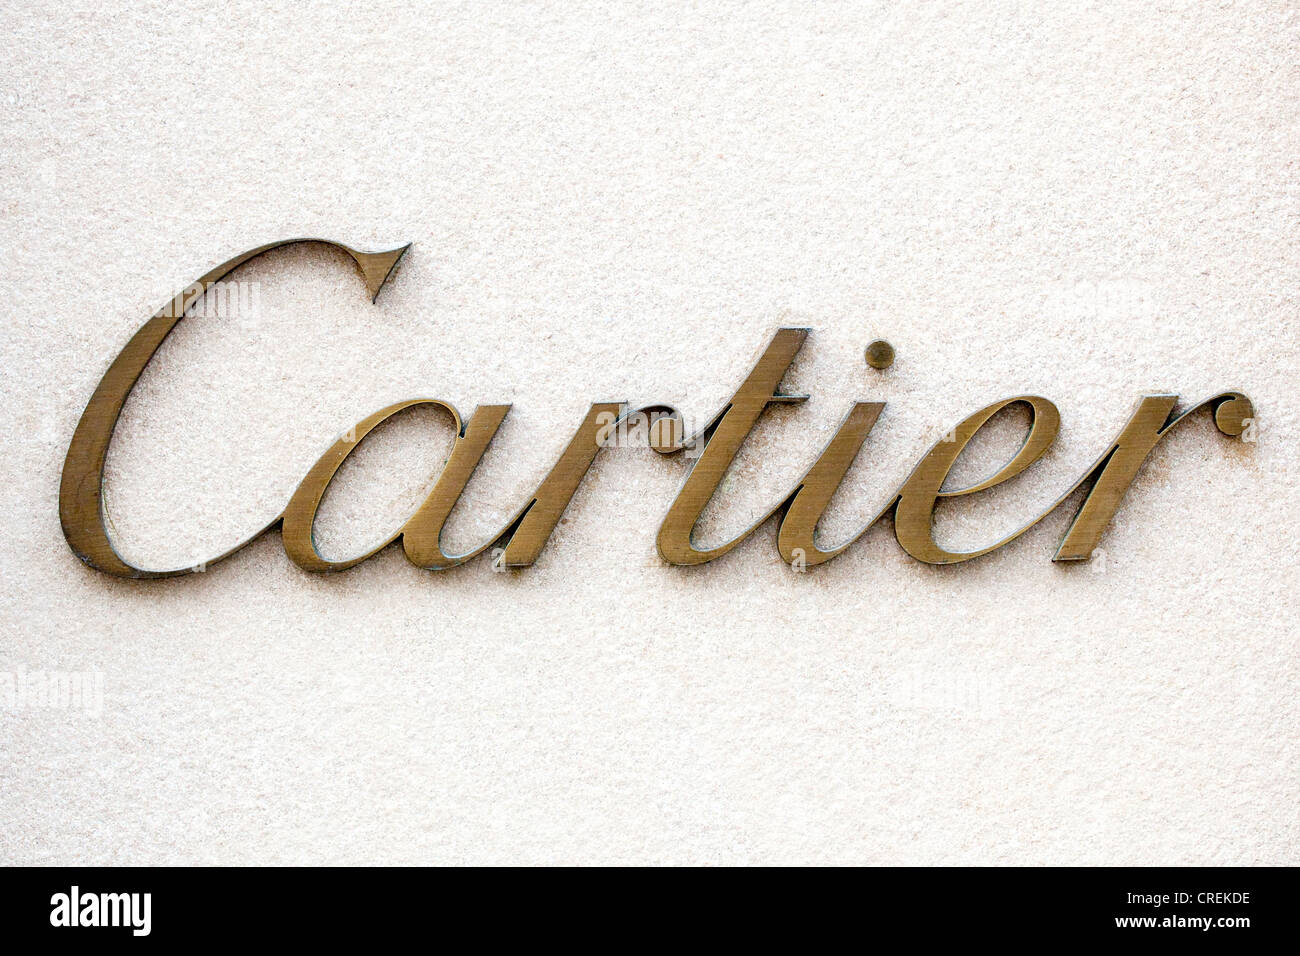 Cartier logo hi-res stock photography and images - Alamy